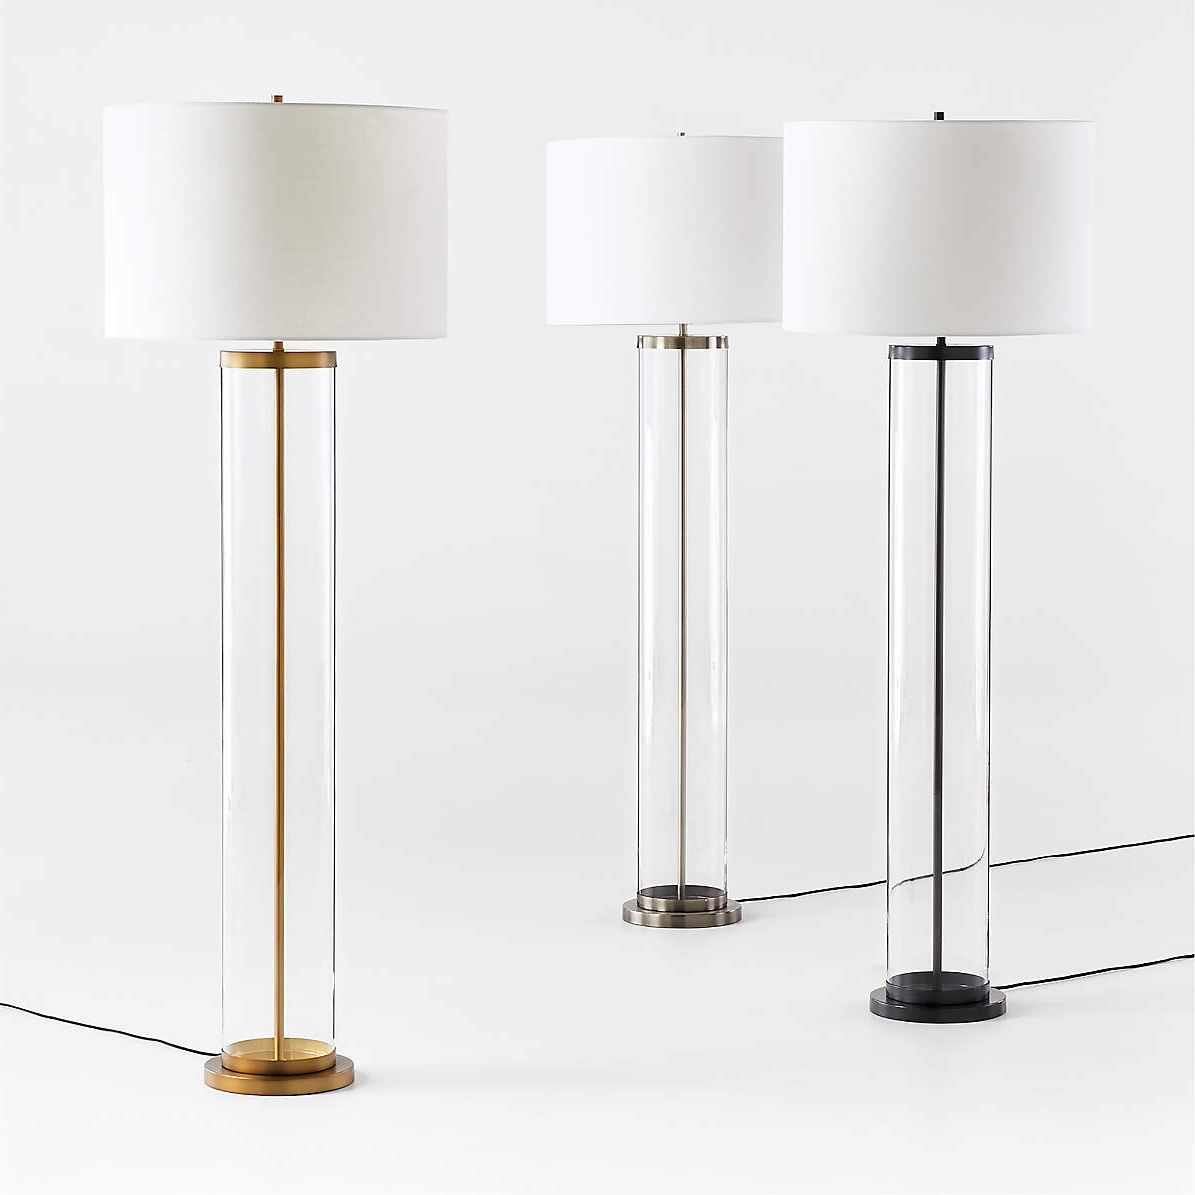 Promenade Floor Lamps With White Shades | Crate & Barrel Regarding White Shade Floor Lamps (View 1 of 20)